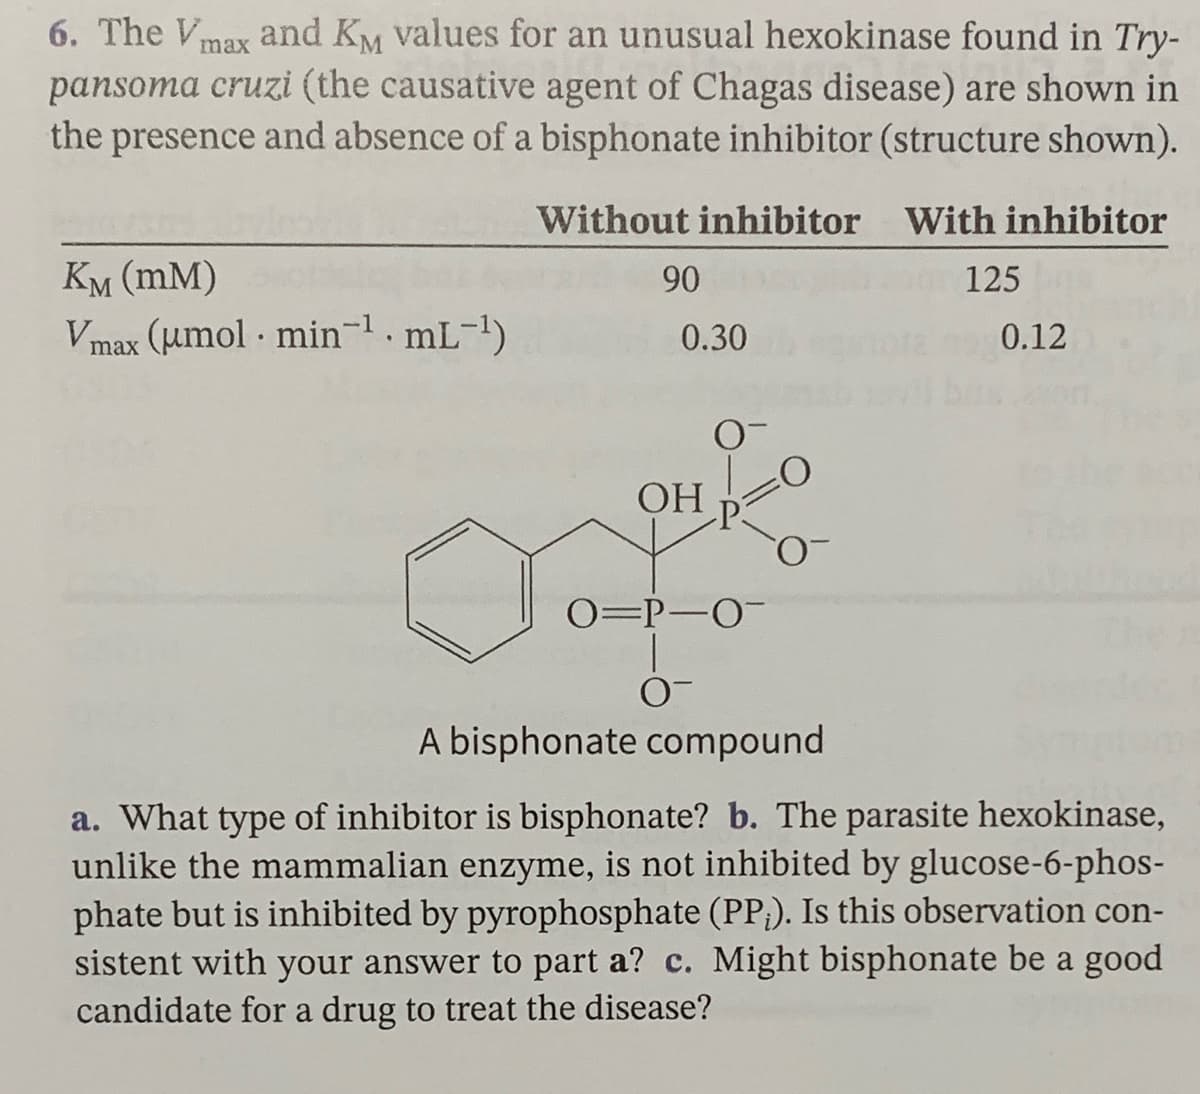 6. The Vmax and KM values for an unusual hexokinase found in Try-
pansoma cruzi (the causative agent of Chagas disease) are shown in
the presence and absence of a bisphonate inhibitor (structure shown).
Without inhibitor
With inhibitor
Км (mM)
90
125
Vn
max (umol min-1. mL-1)
0.30
0.12
ОН
O=P-O-
A bisphonate compound
a. What type of inhibitor is bisphonate? b. The parasite hexokinase,
unlike the mammalian enzyme, is not inhibited by glucose-6-phos-
phate but is inhibited by pyrophosphate (PP;). Is this observation con-
sistent with your answer to part a? c. Might bisphonate be a good
candidate for a drug to treat the disease?
